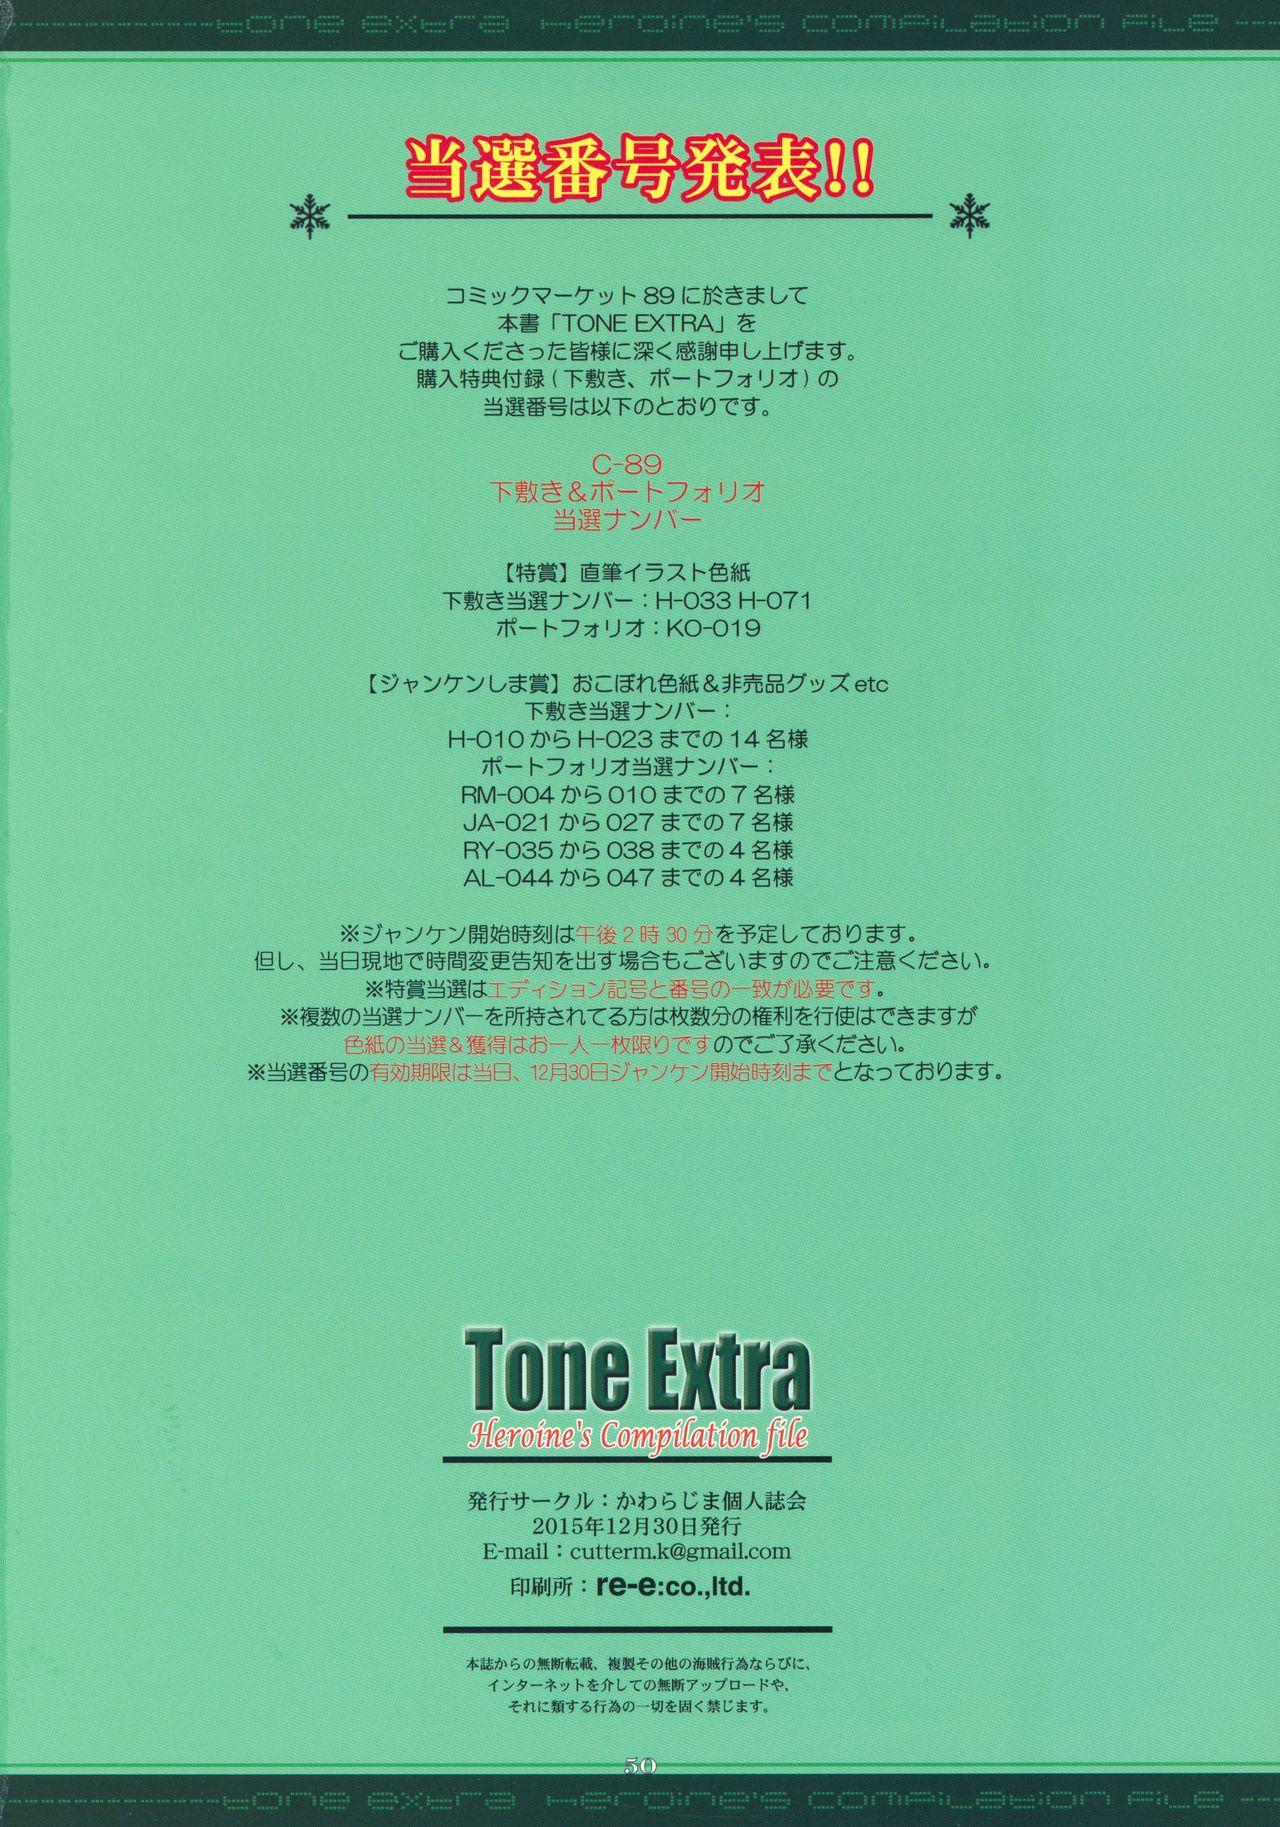 Gay Emo Tone Extra Heroine's Compilation File - Space battleship yamato 2199 Jerkoff - Page 49